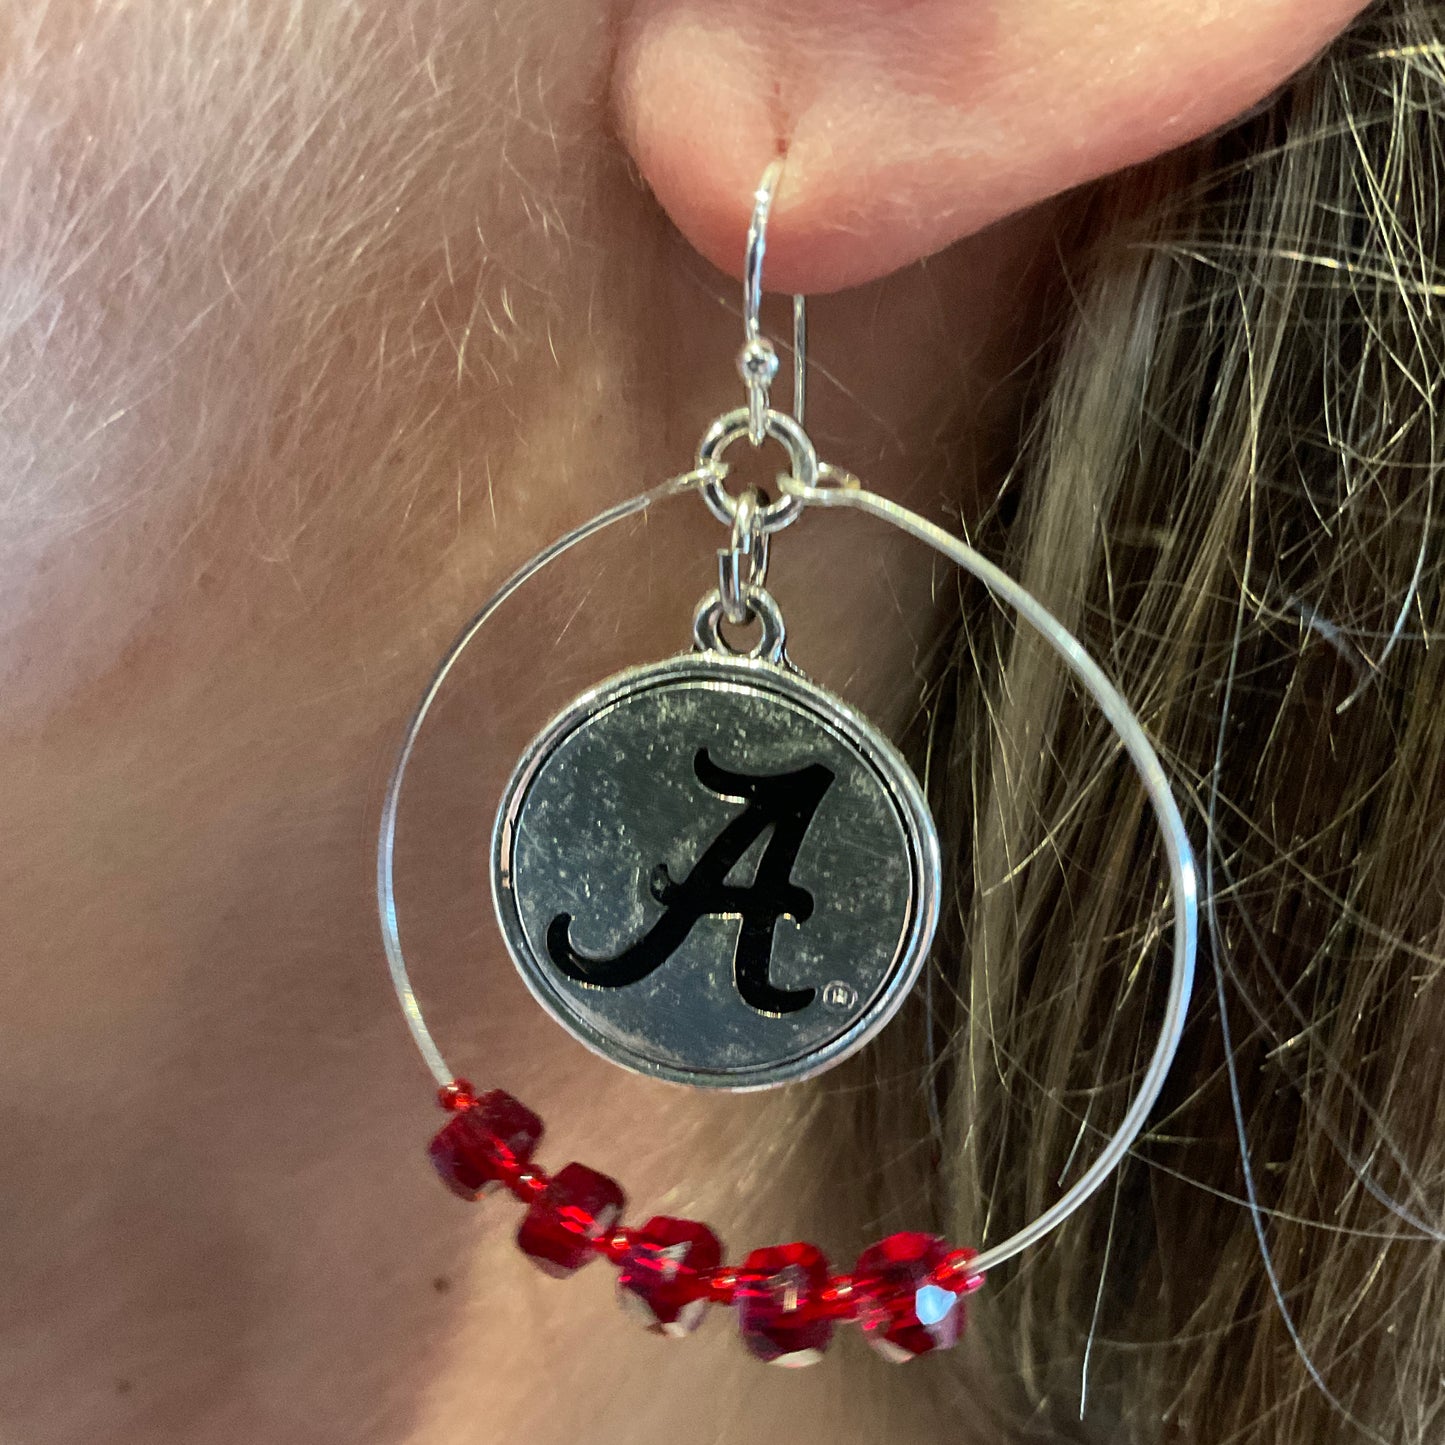 From The Heart Alabama Looped Round Logo Earring